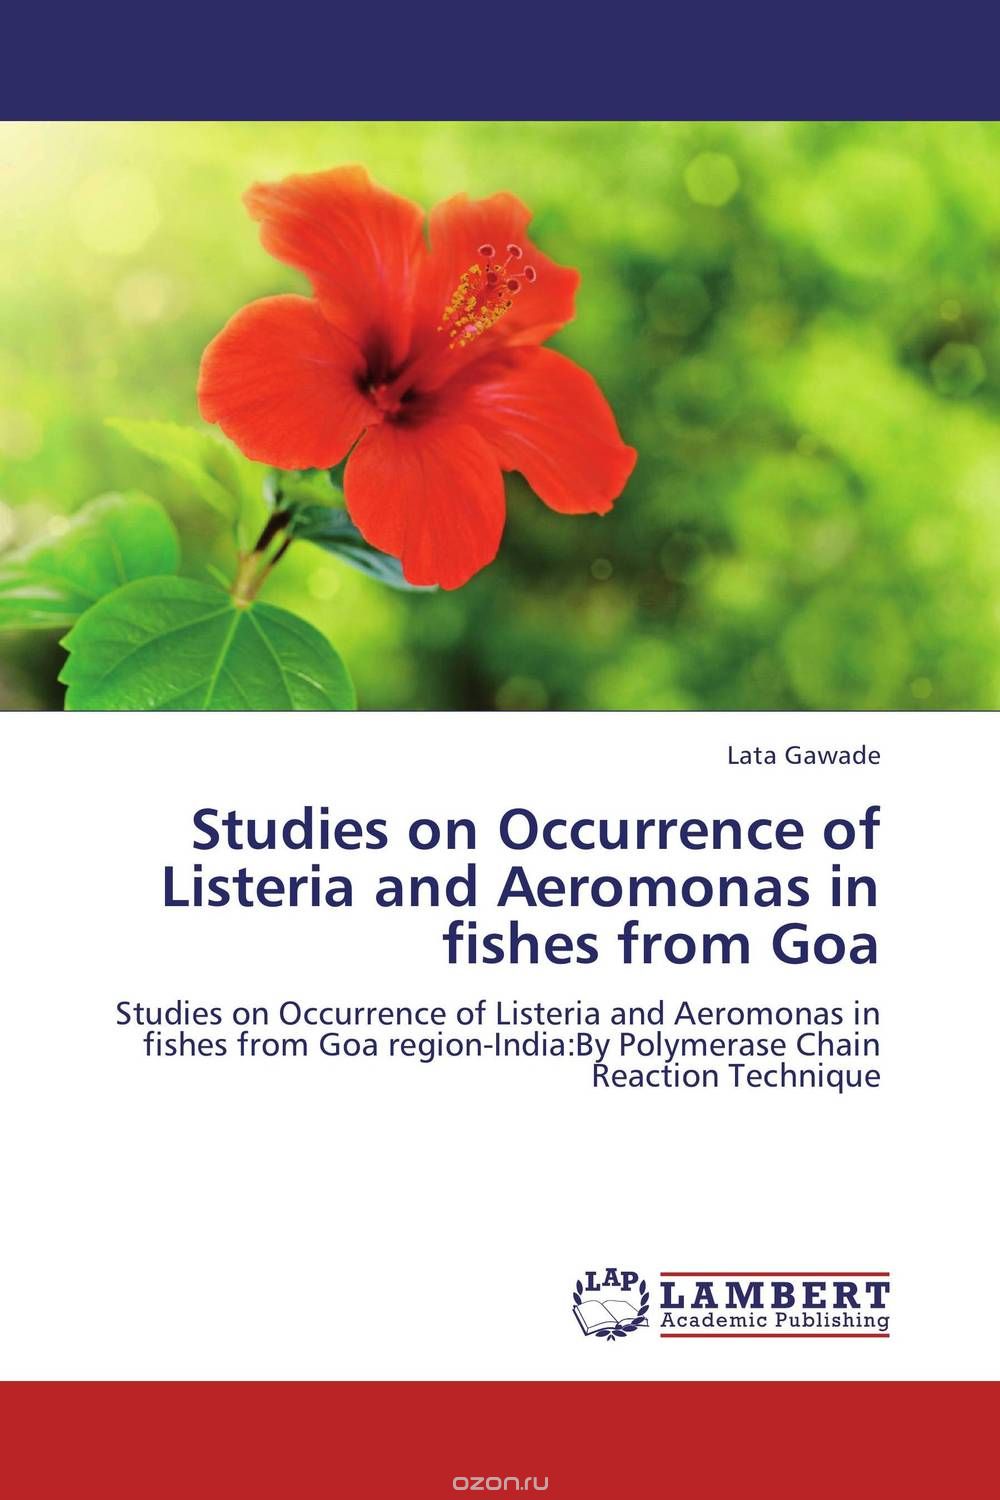 Скачать книгу "Studies on Occurrence of Listeria and Aeromonas in fishes from Goa"